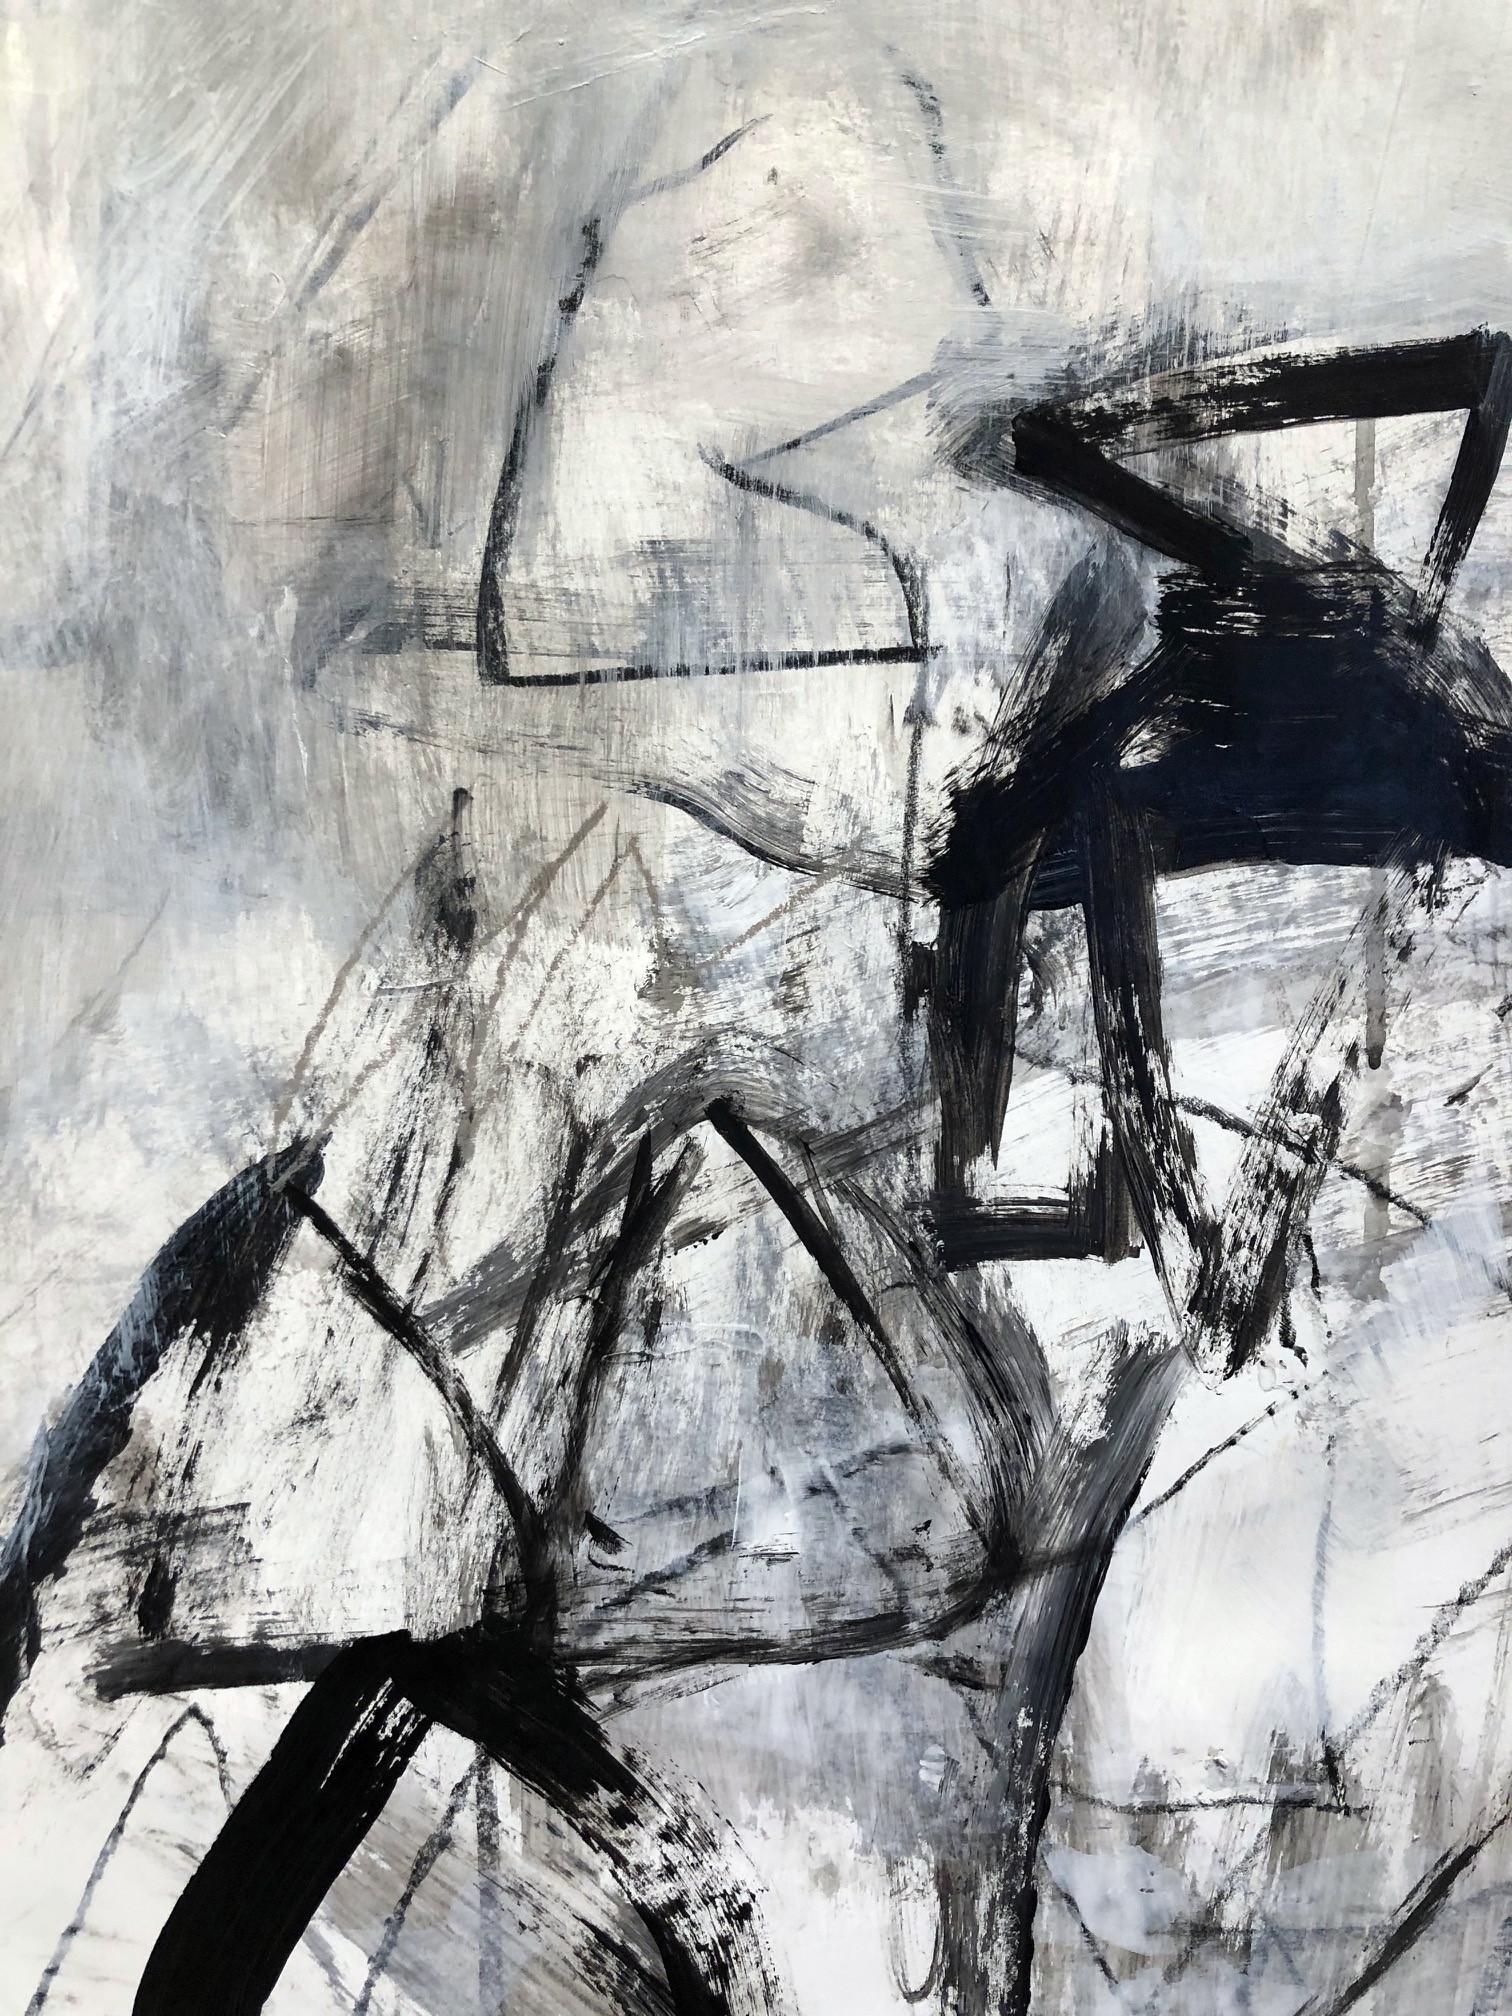 Resonate II, mixed media on paper, 40 X 30  
 Abstract using soft grays and black.
For exact shipping costs, please give location.
comes unframed.

About the Artist: Julie Schumer, a native of Los Angeles, California, and born in 1954, lives and